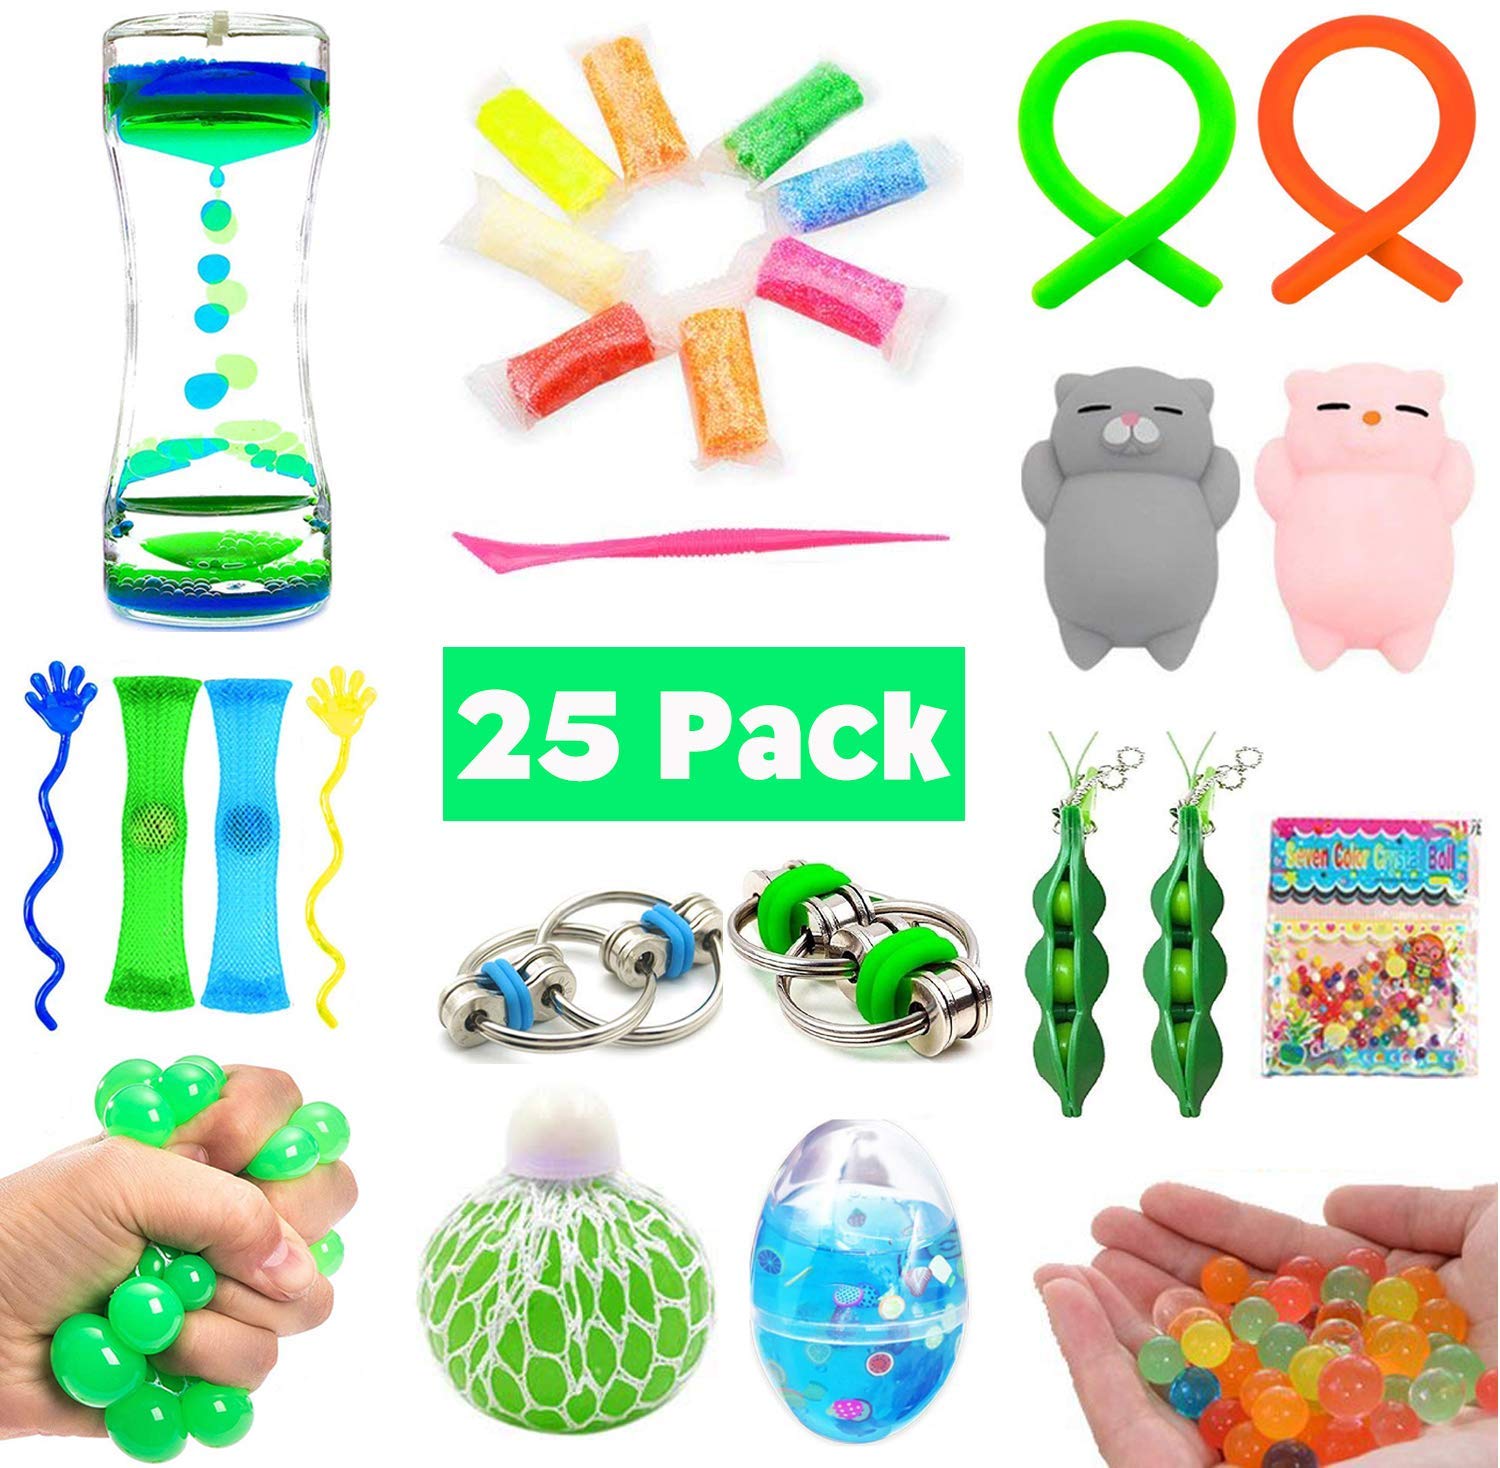 Assorted Colors Great for Party Favors Simple Joy Sphere Toy Rings Stretch Expanding Ball and Rainbow Magic Spring Toys Set of 2